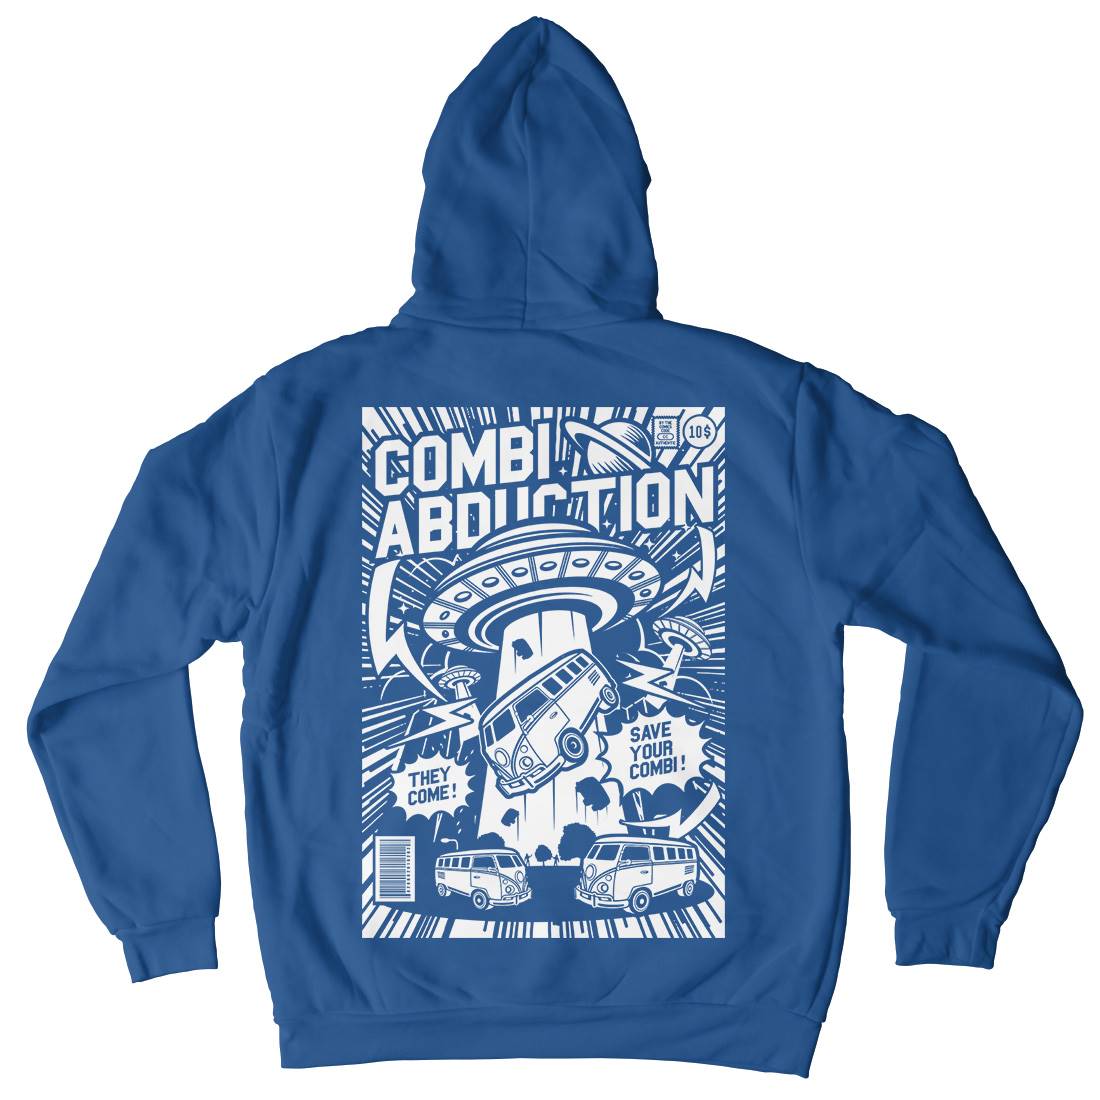 Combi Abduction Mens Hoodie With Pocket Space A220